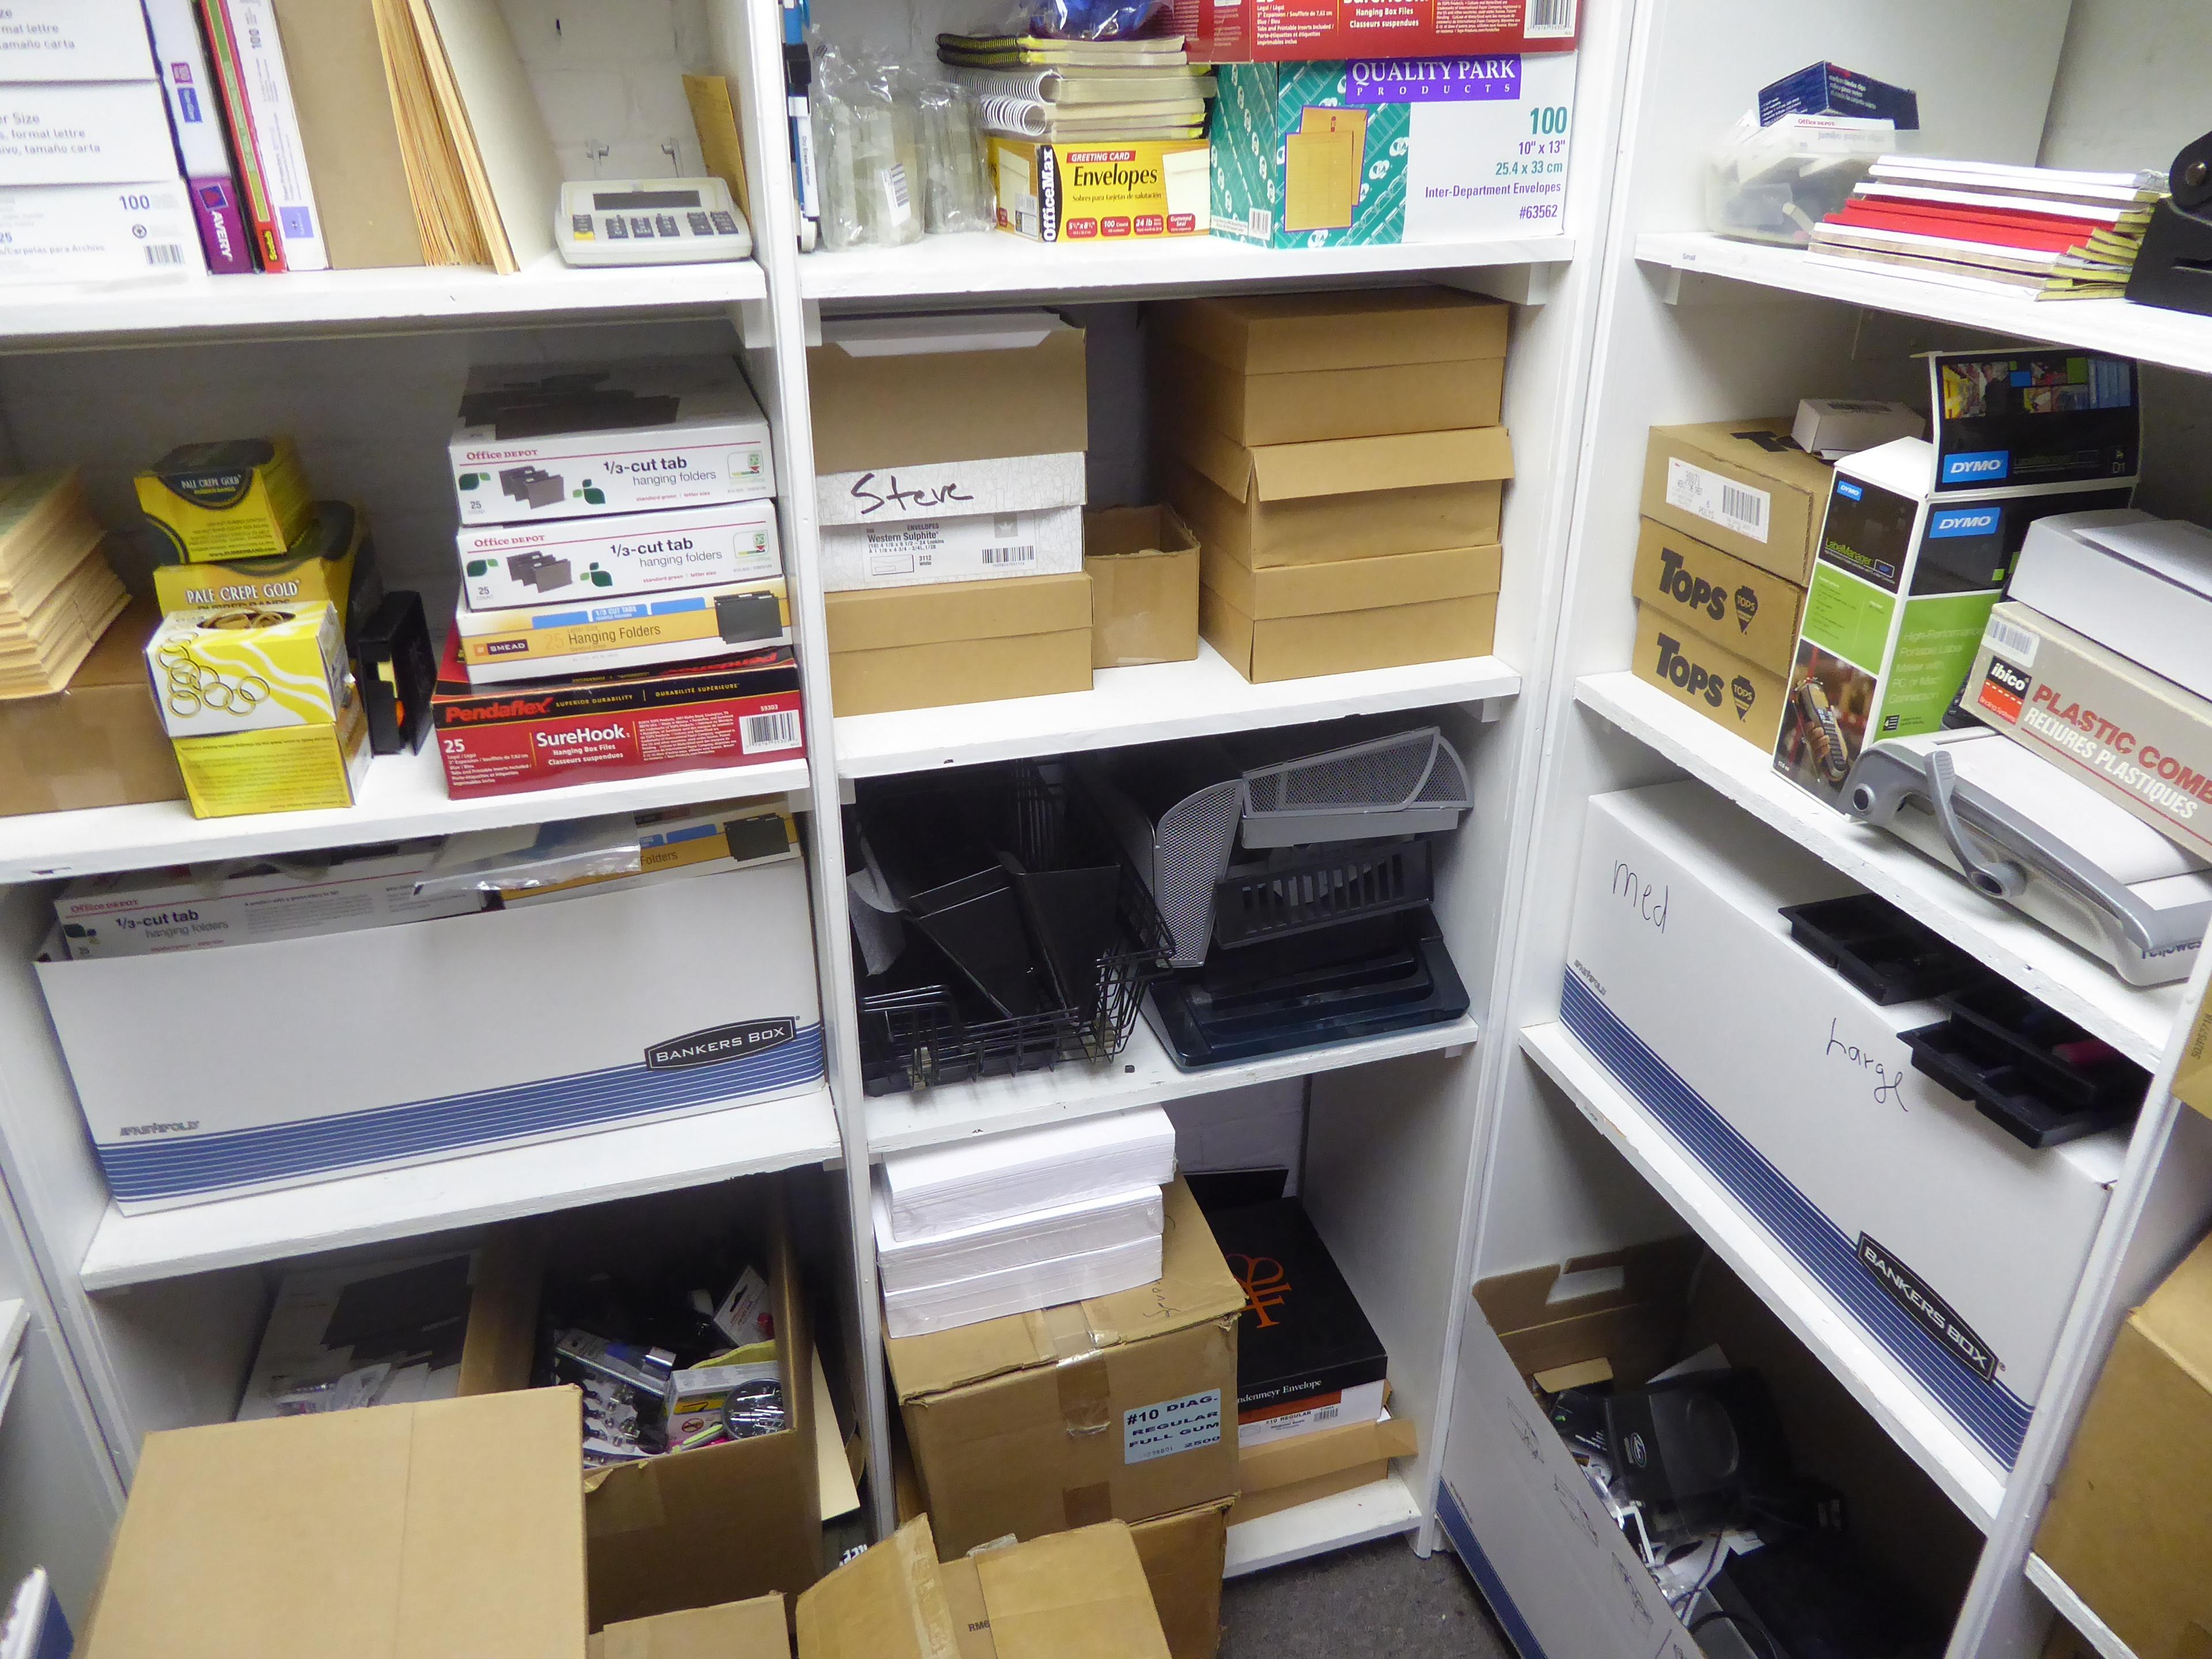 Contents of Room: Reams of Paper, Office Supplies, Dymo Label Maker, Time Clock,Etc. (Lot)